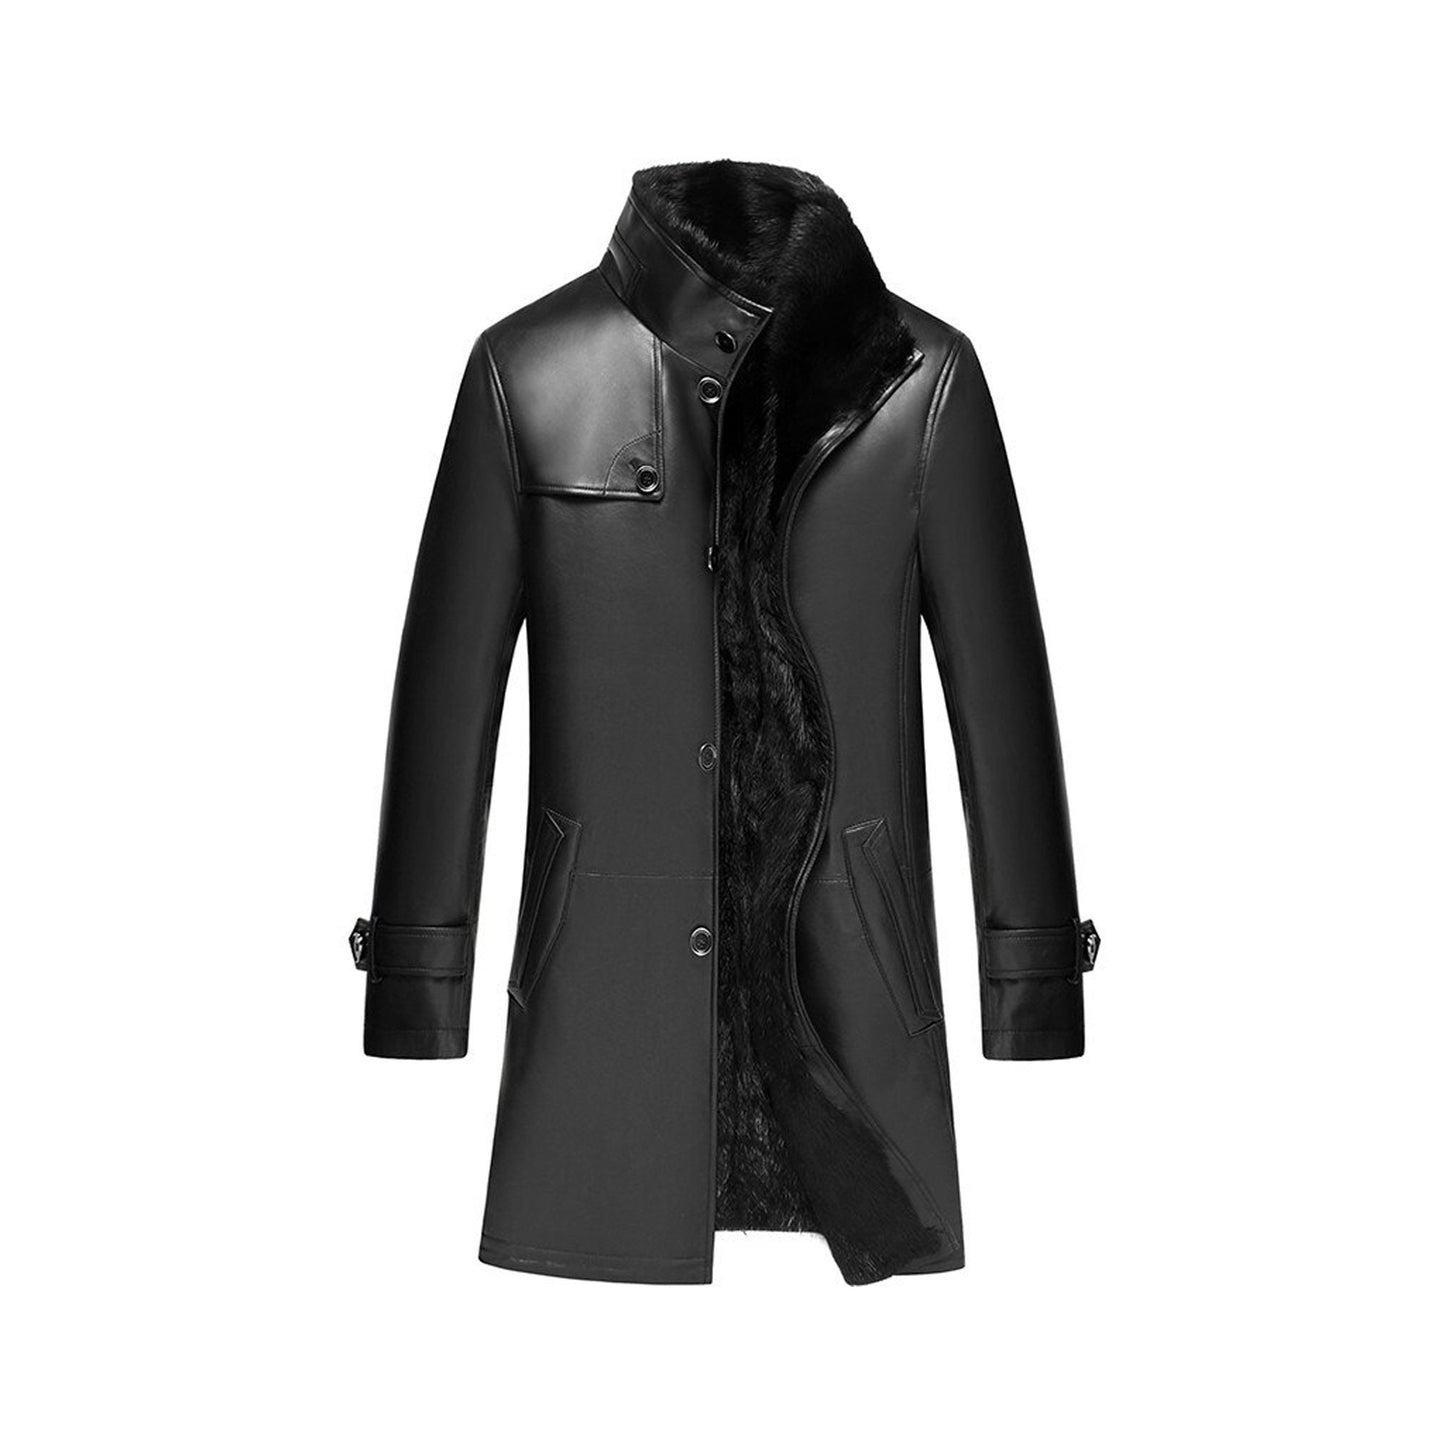 Premium Quality Leather Long Jacket for Mens Sheep Skin Leather Jacket with Woolen Lining Fur Collar Leather Jacket Mens Leather Overcoat